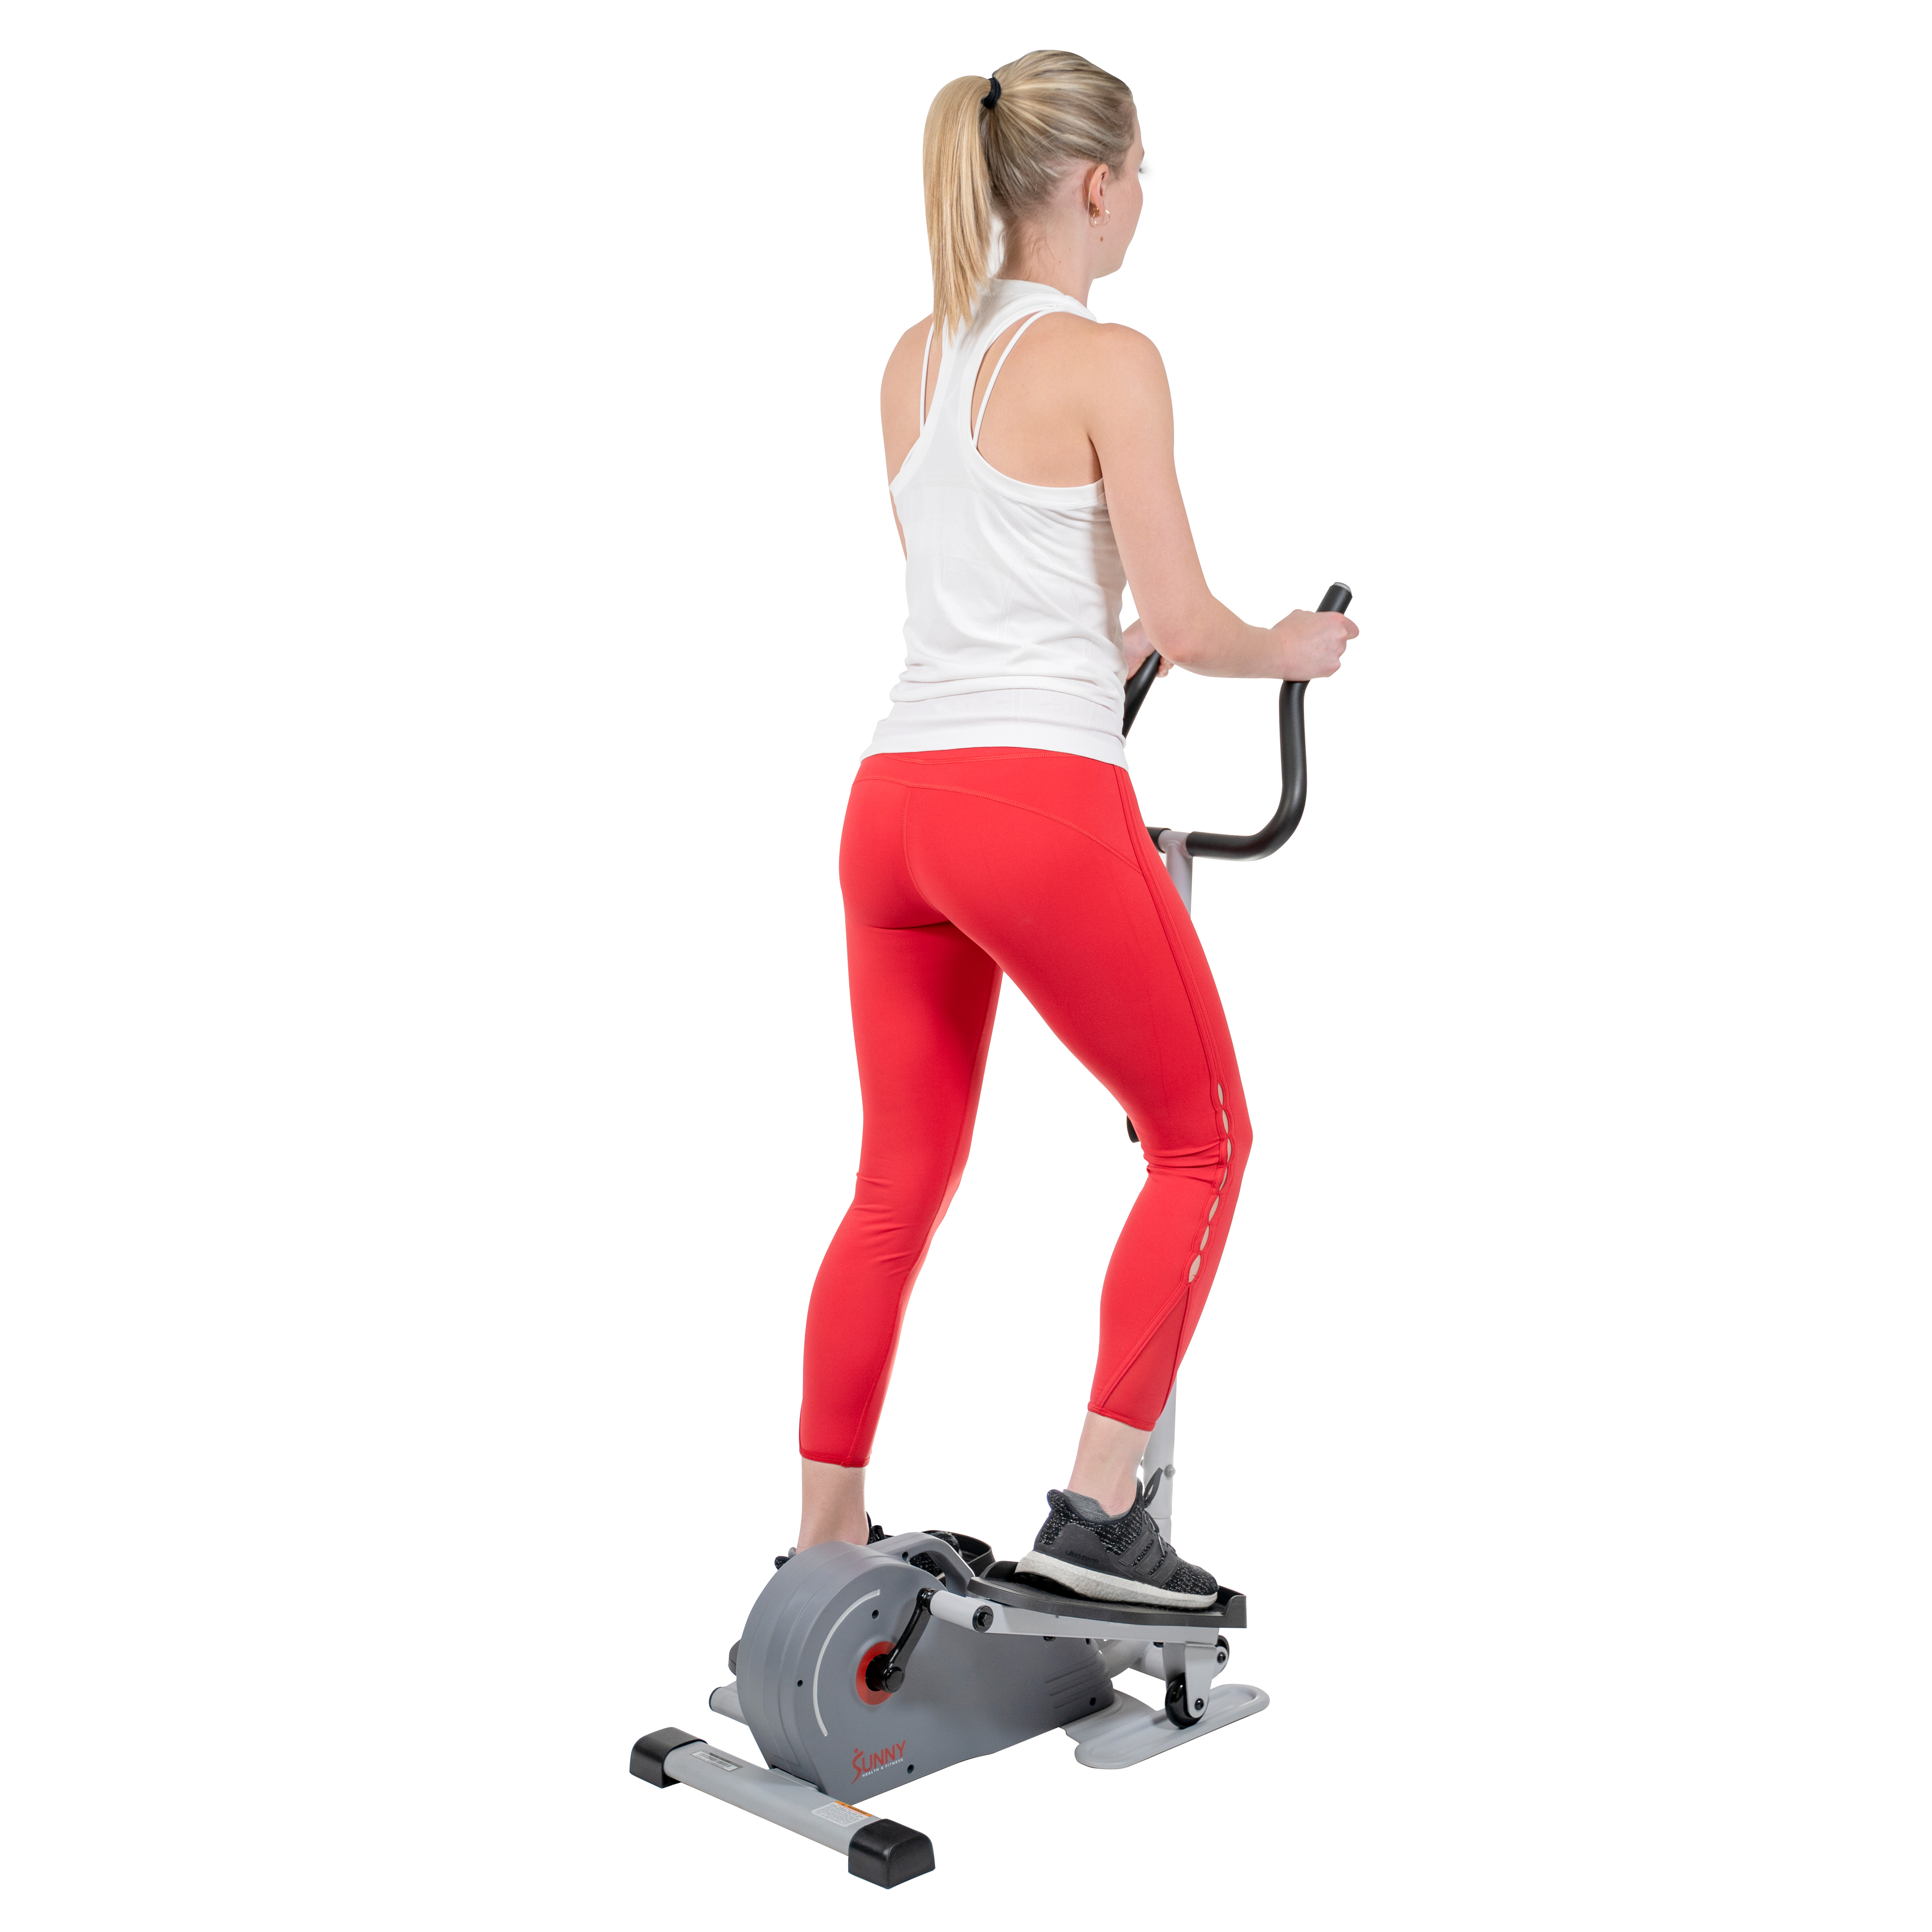 Sunny Health & Fitness Compact Magnetic Standing Elliptical Machine w/ Handlebars - Portable Workout Stepper for Home, SF-E3988 - image 8 of 18